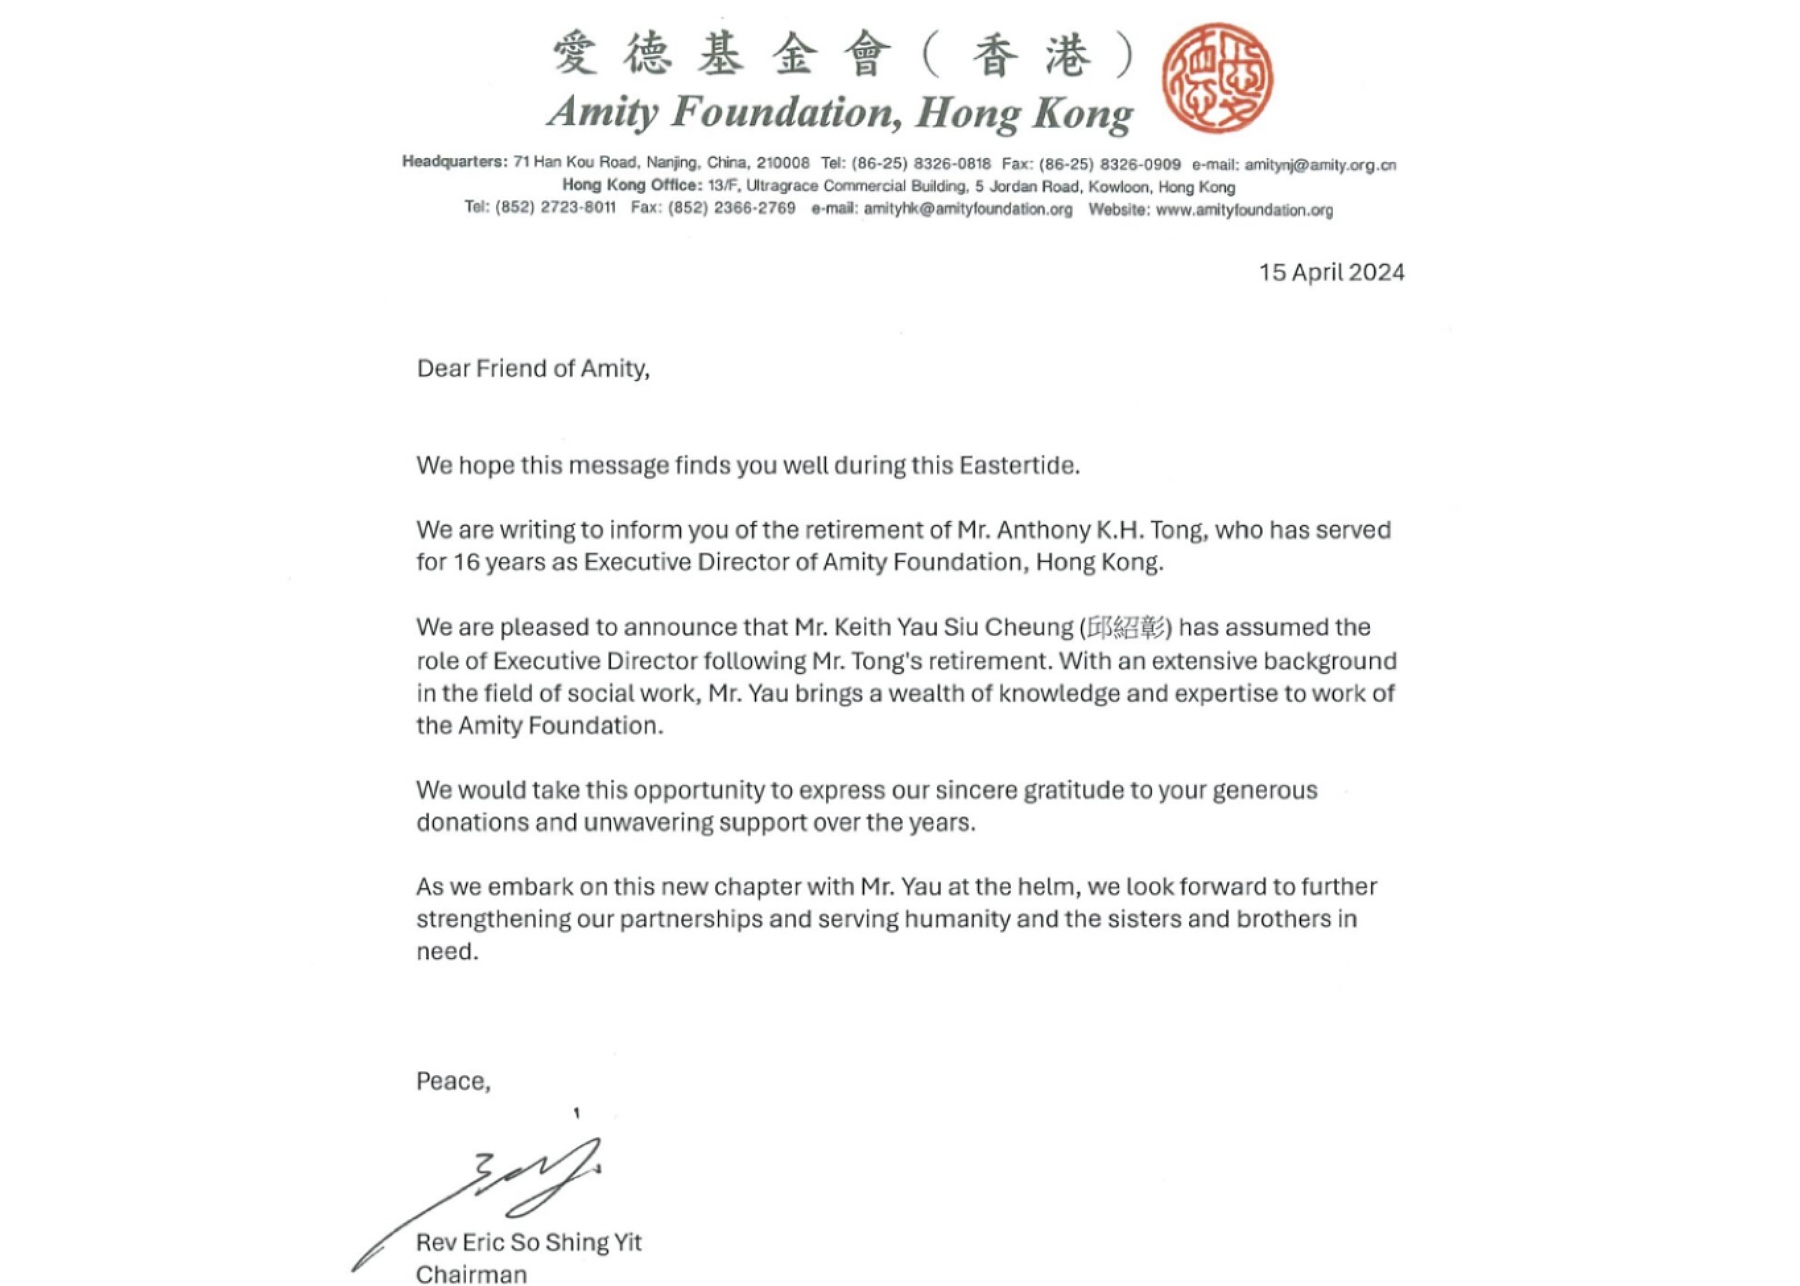 The notice of change of the executive director for the Amity Foundation, Hong Kong, was released on April 15, 2024. 